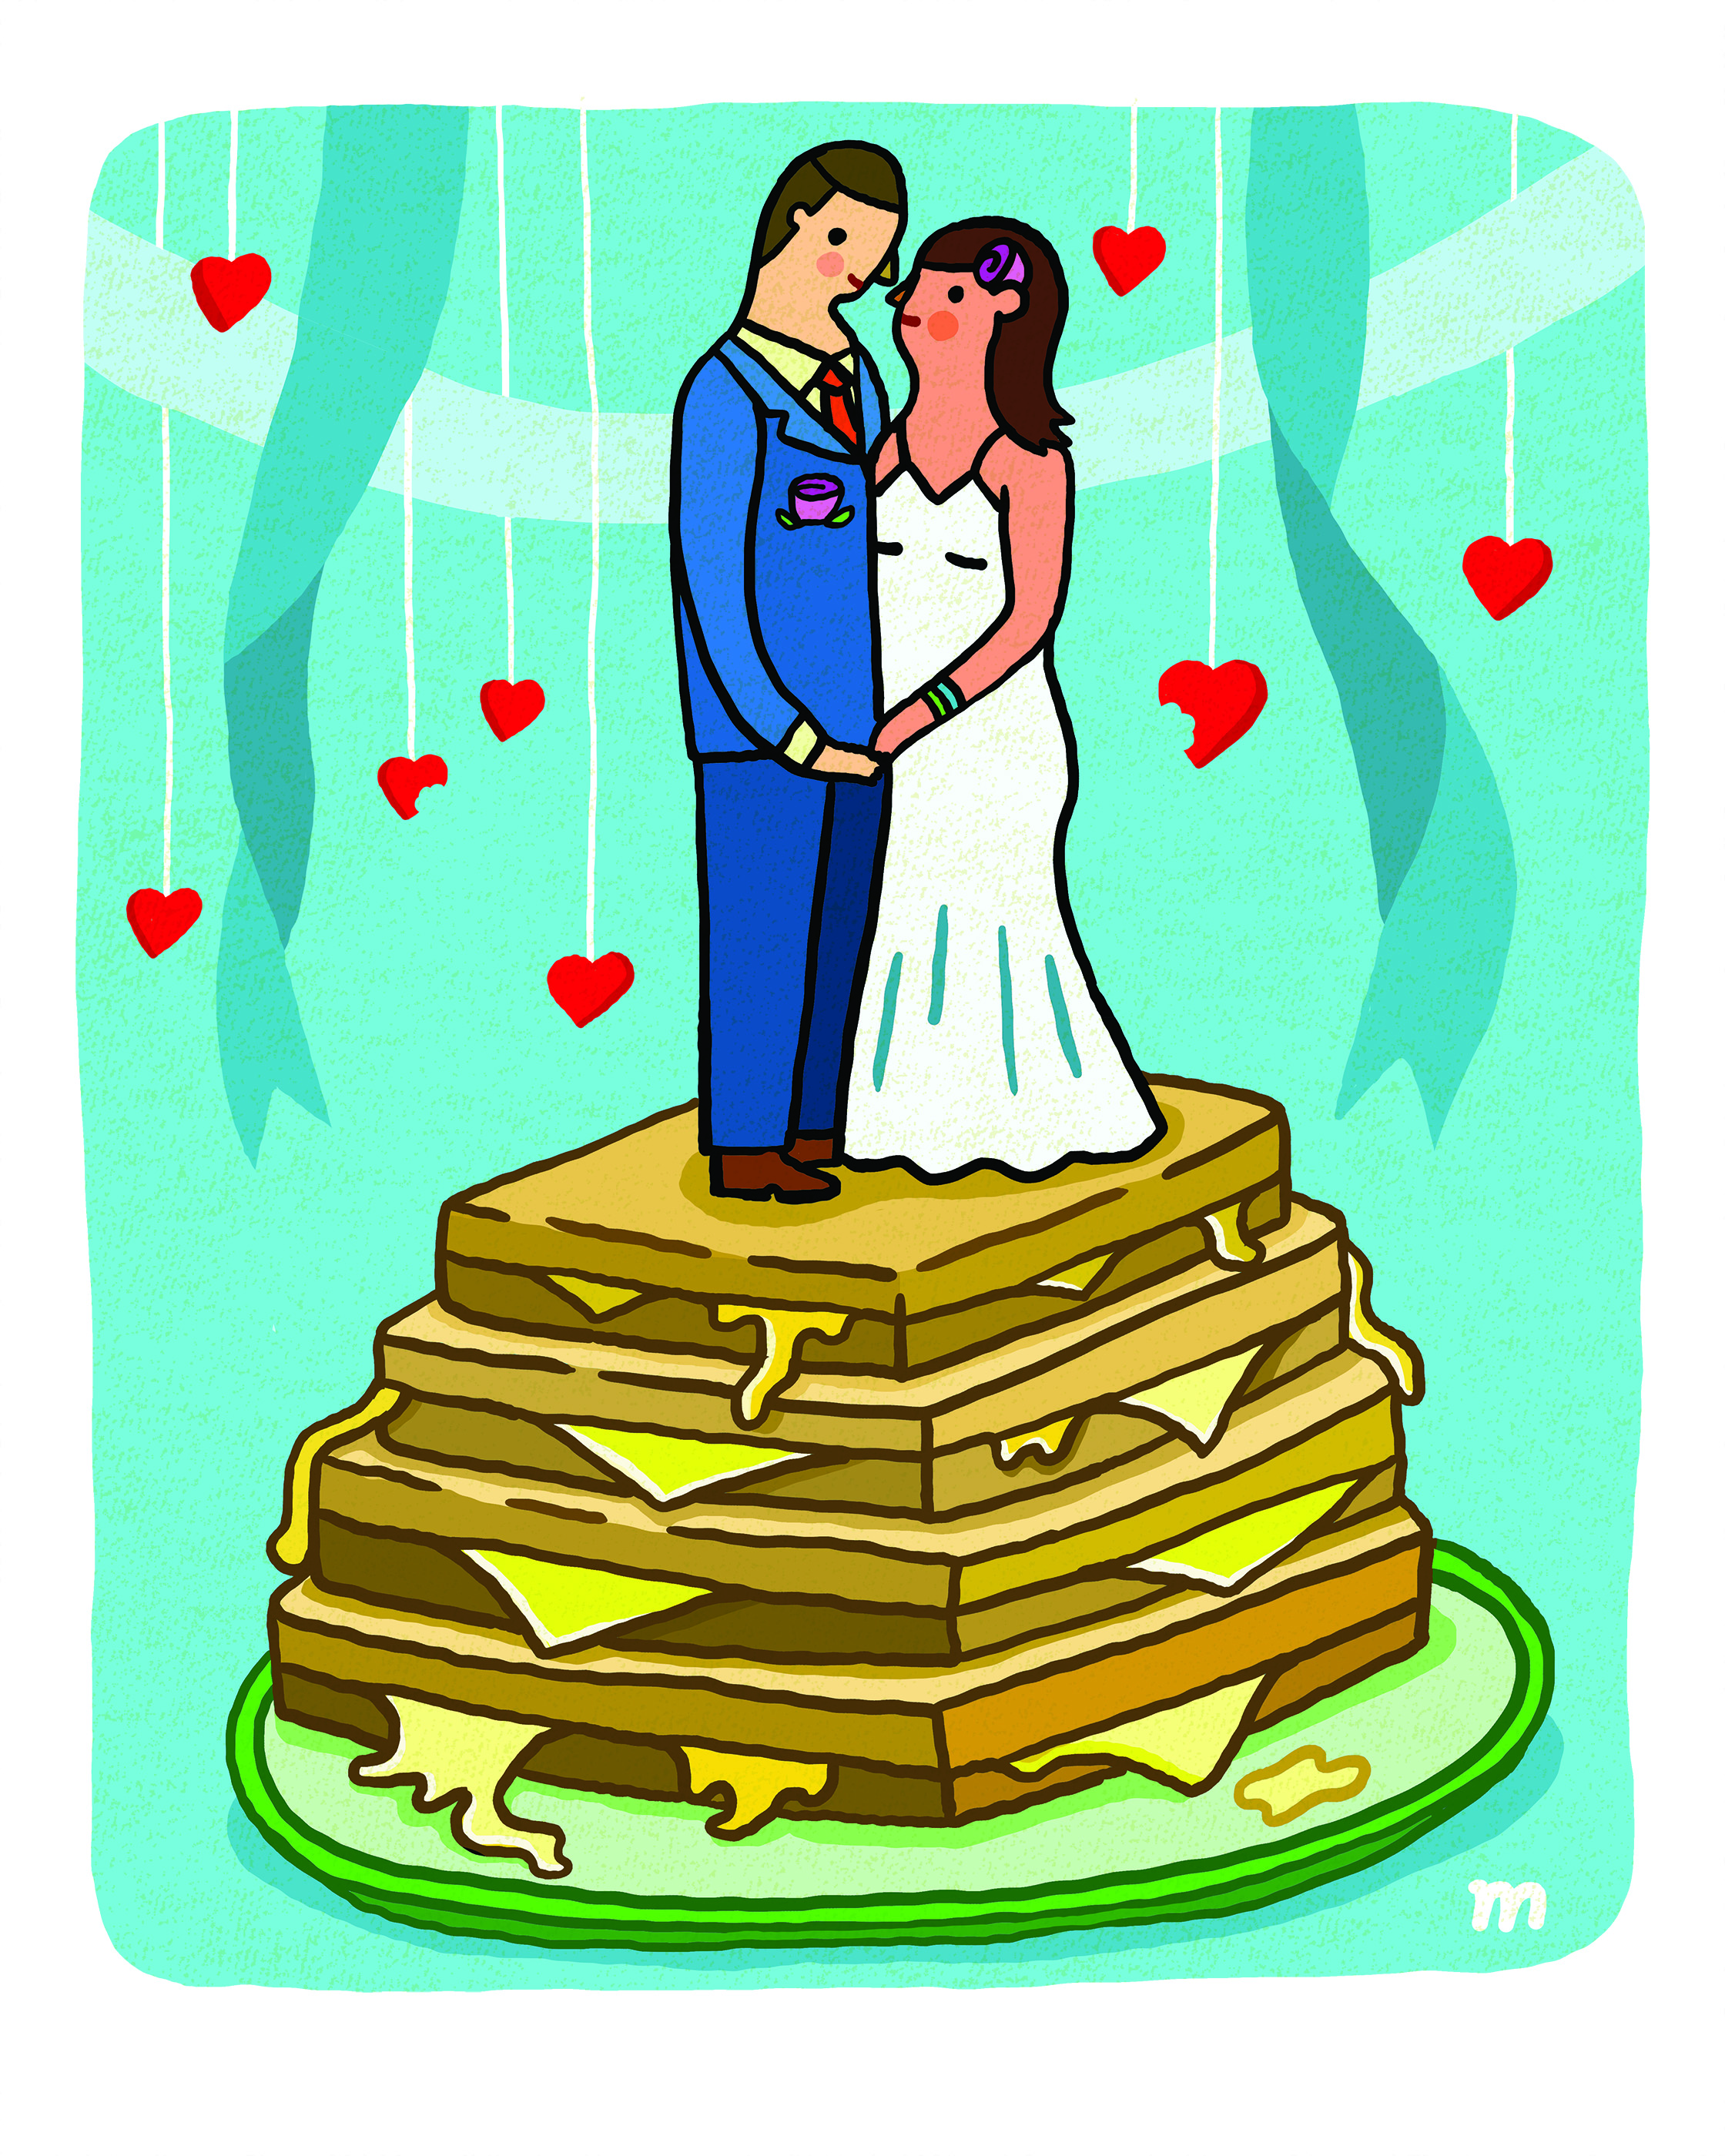 illustration of a wedding cake of grilled cheese and bride and groom topper by Aaron Meshon